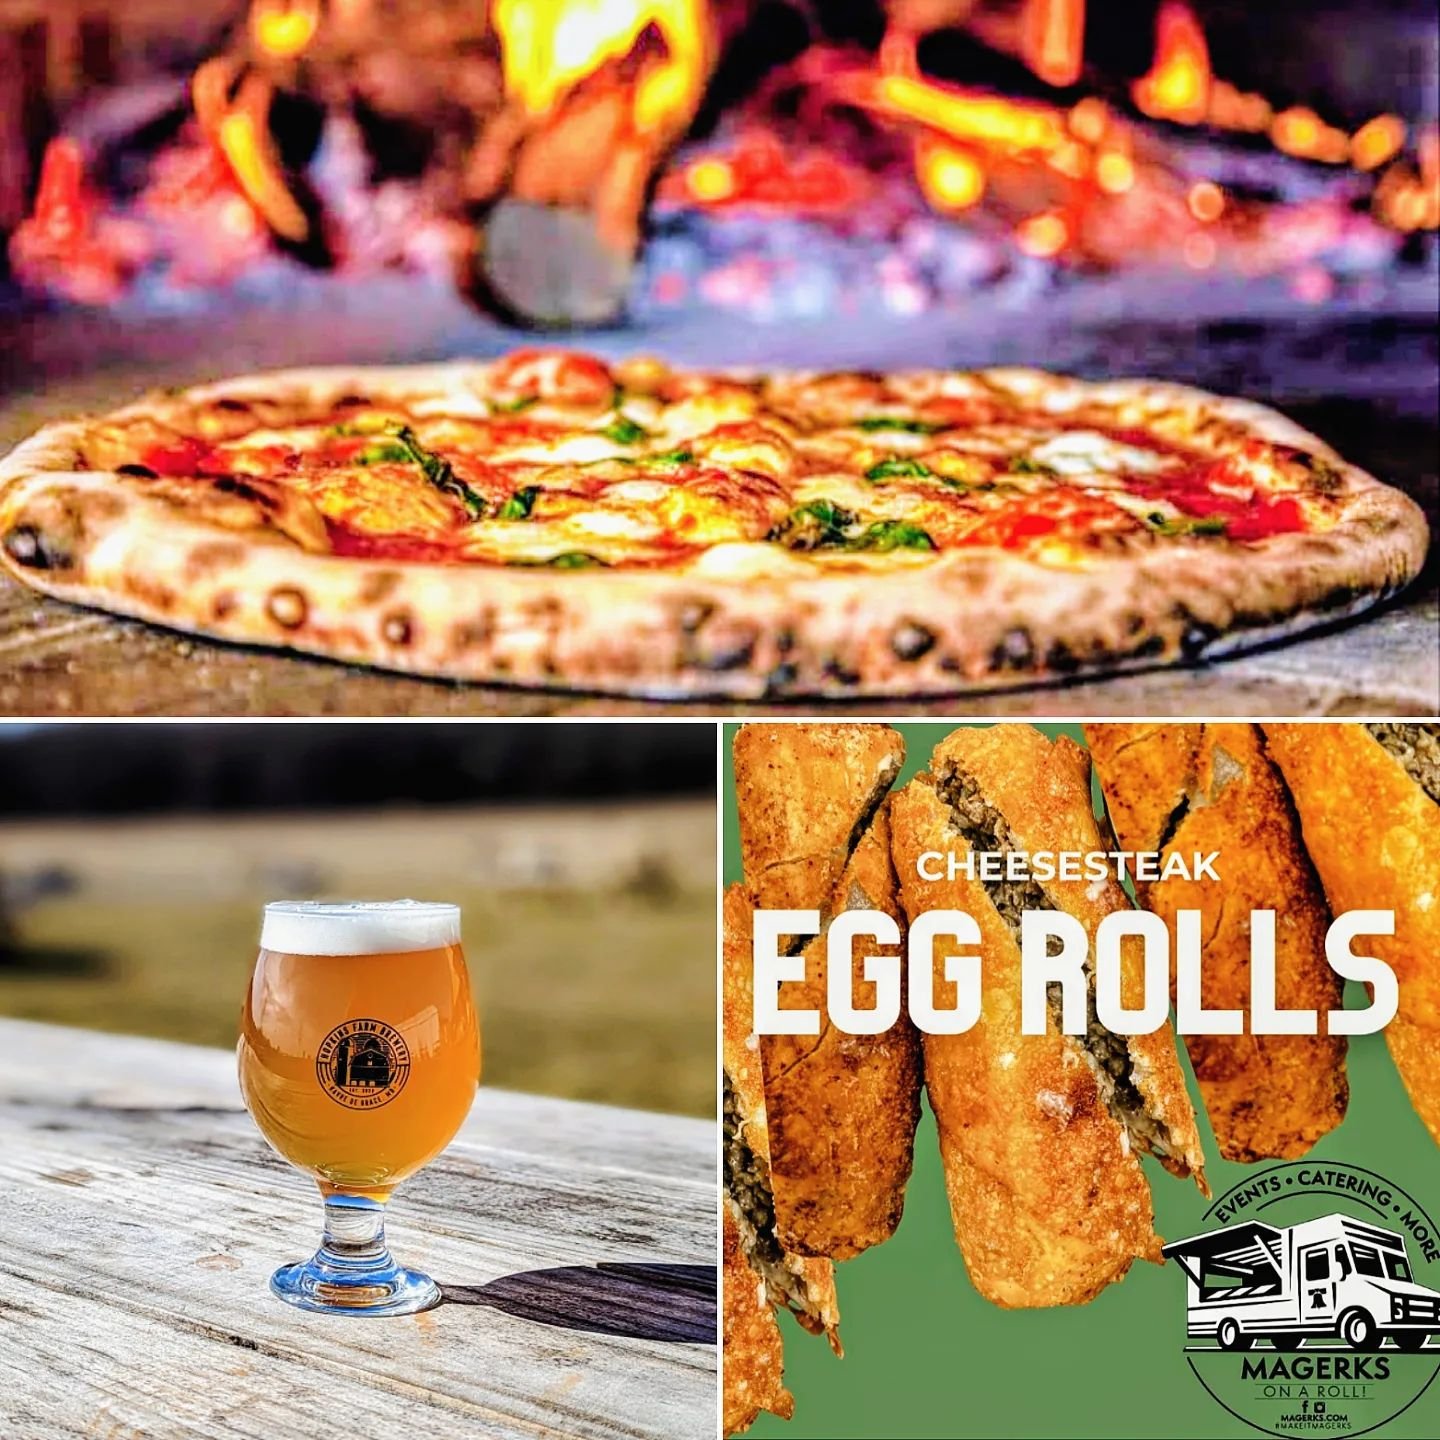 Beer, pizza, cheesesteak egg rolls, live music...sounds like the perfect Friday!

@thepitshack at 12PM
@magerks_on_a_roll AT 4PM
@adm0 at 5PM